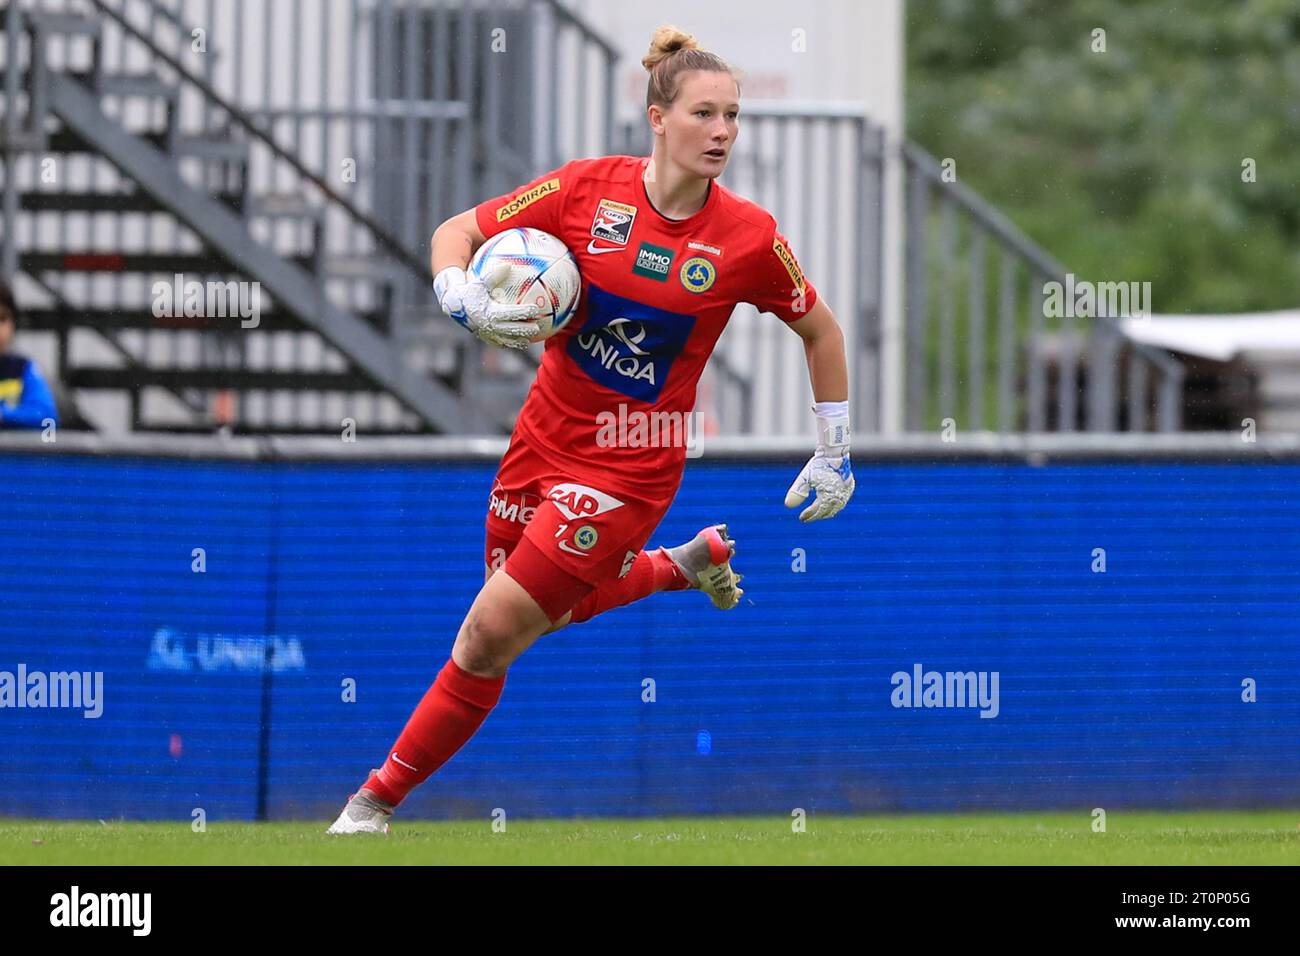 Pia Piplits (1 First Vienna FC) in action during the Admiral Frauen Bundesliga match First Vienna FC vs SCR Altach at Hohe Warte  (Tom Seiss/ SPP) Stock Photo